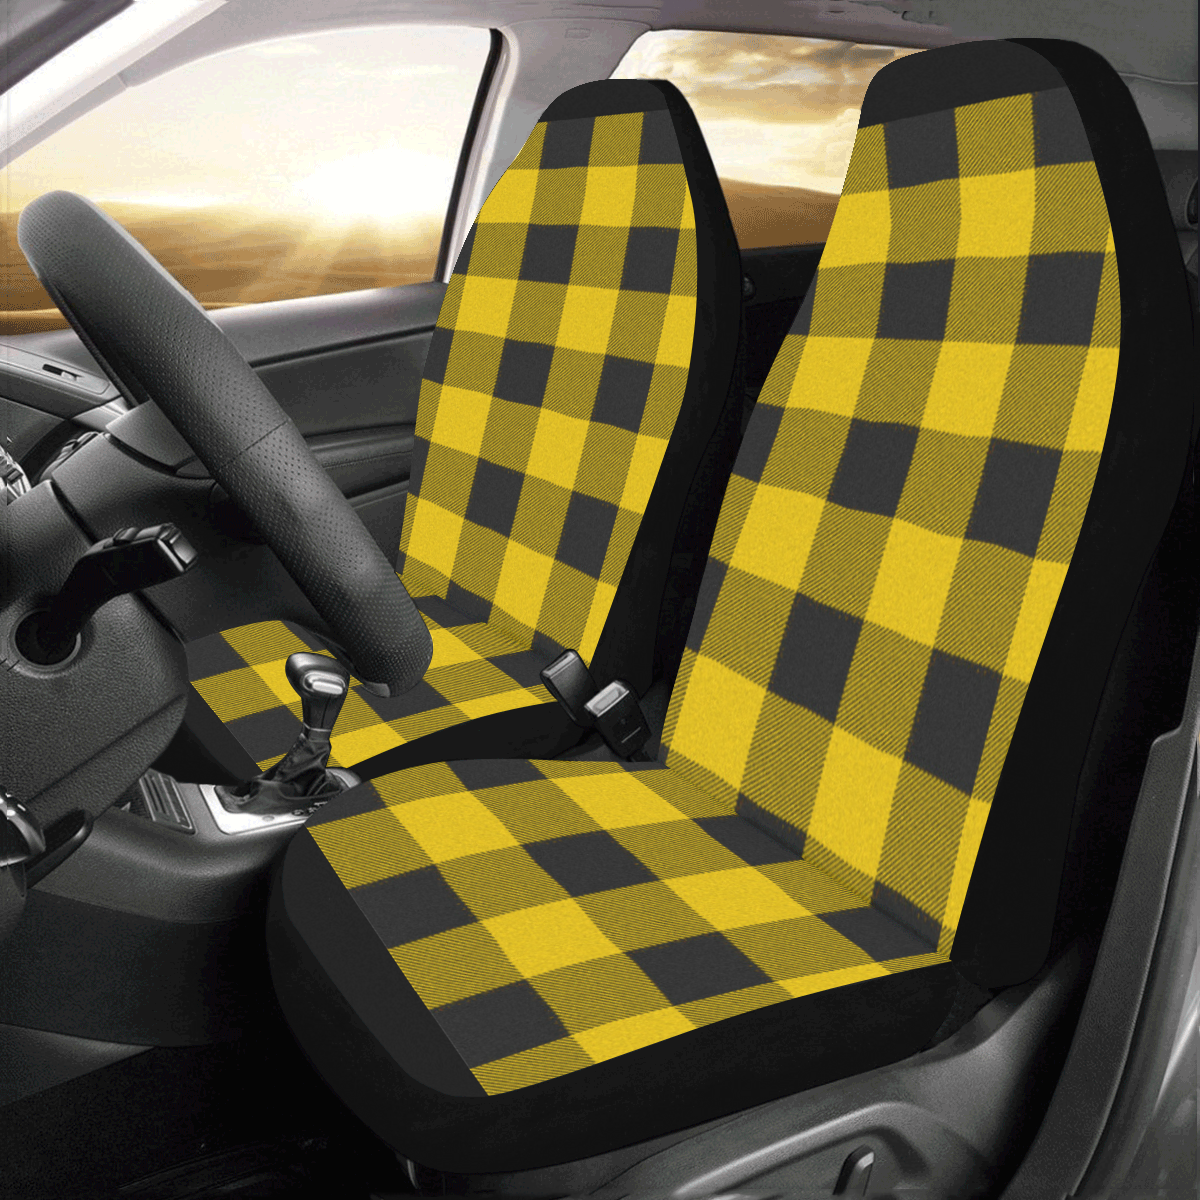 yellow  black plaid Car Seat Covers (Set of 2)